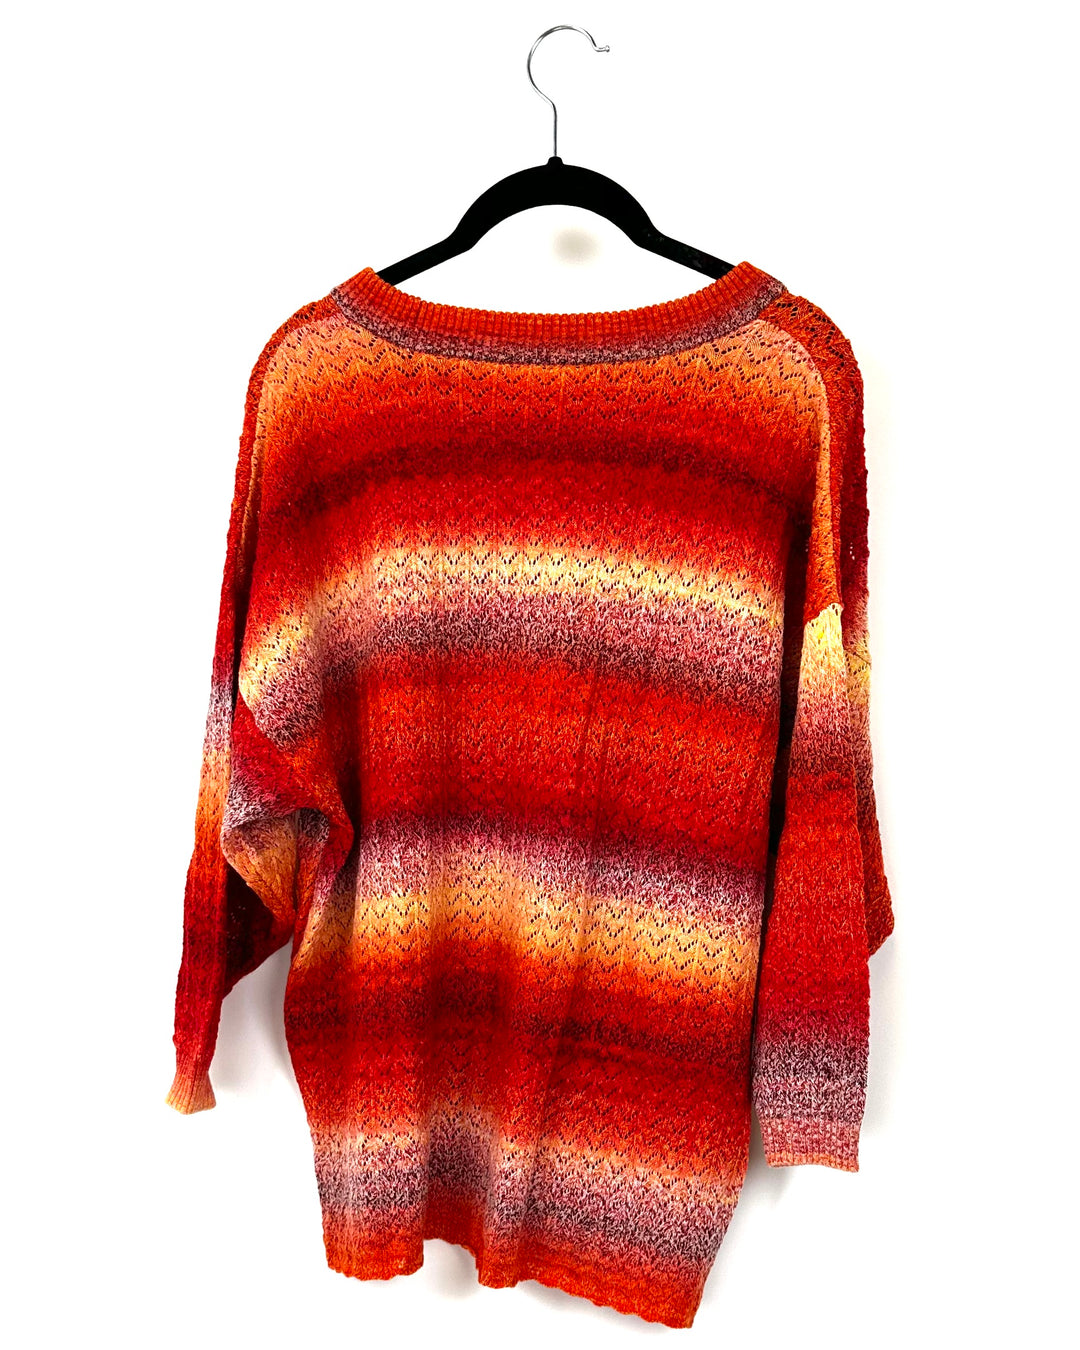 Red Gradient Knit Sweater - Small